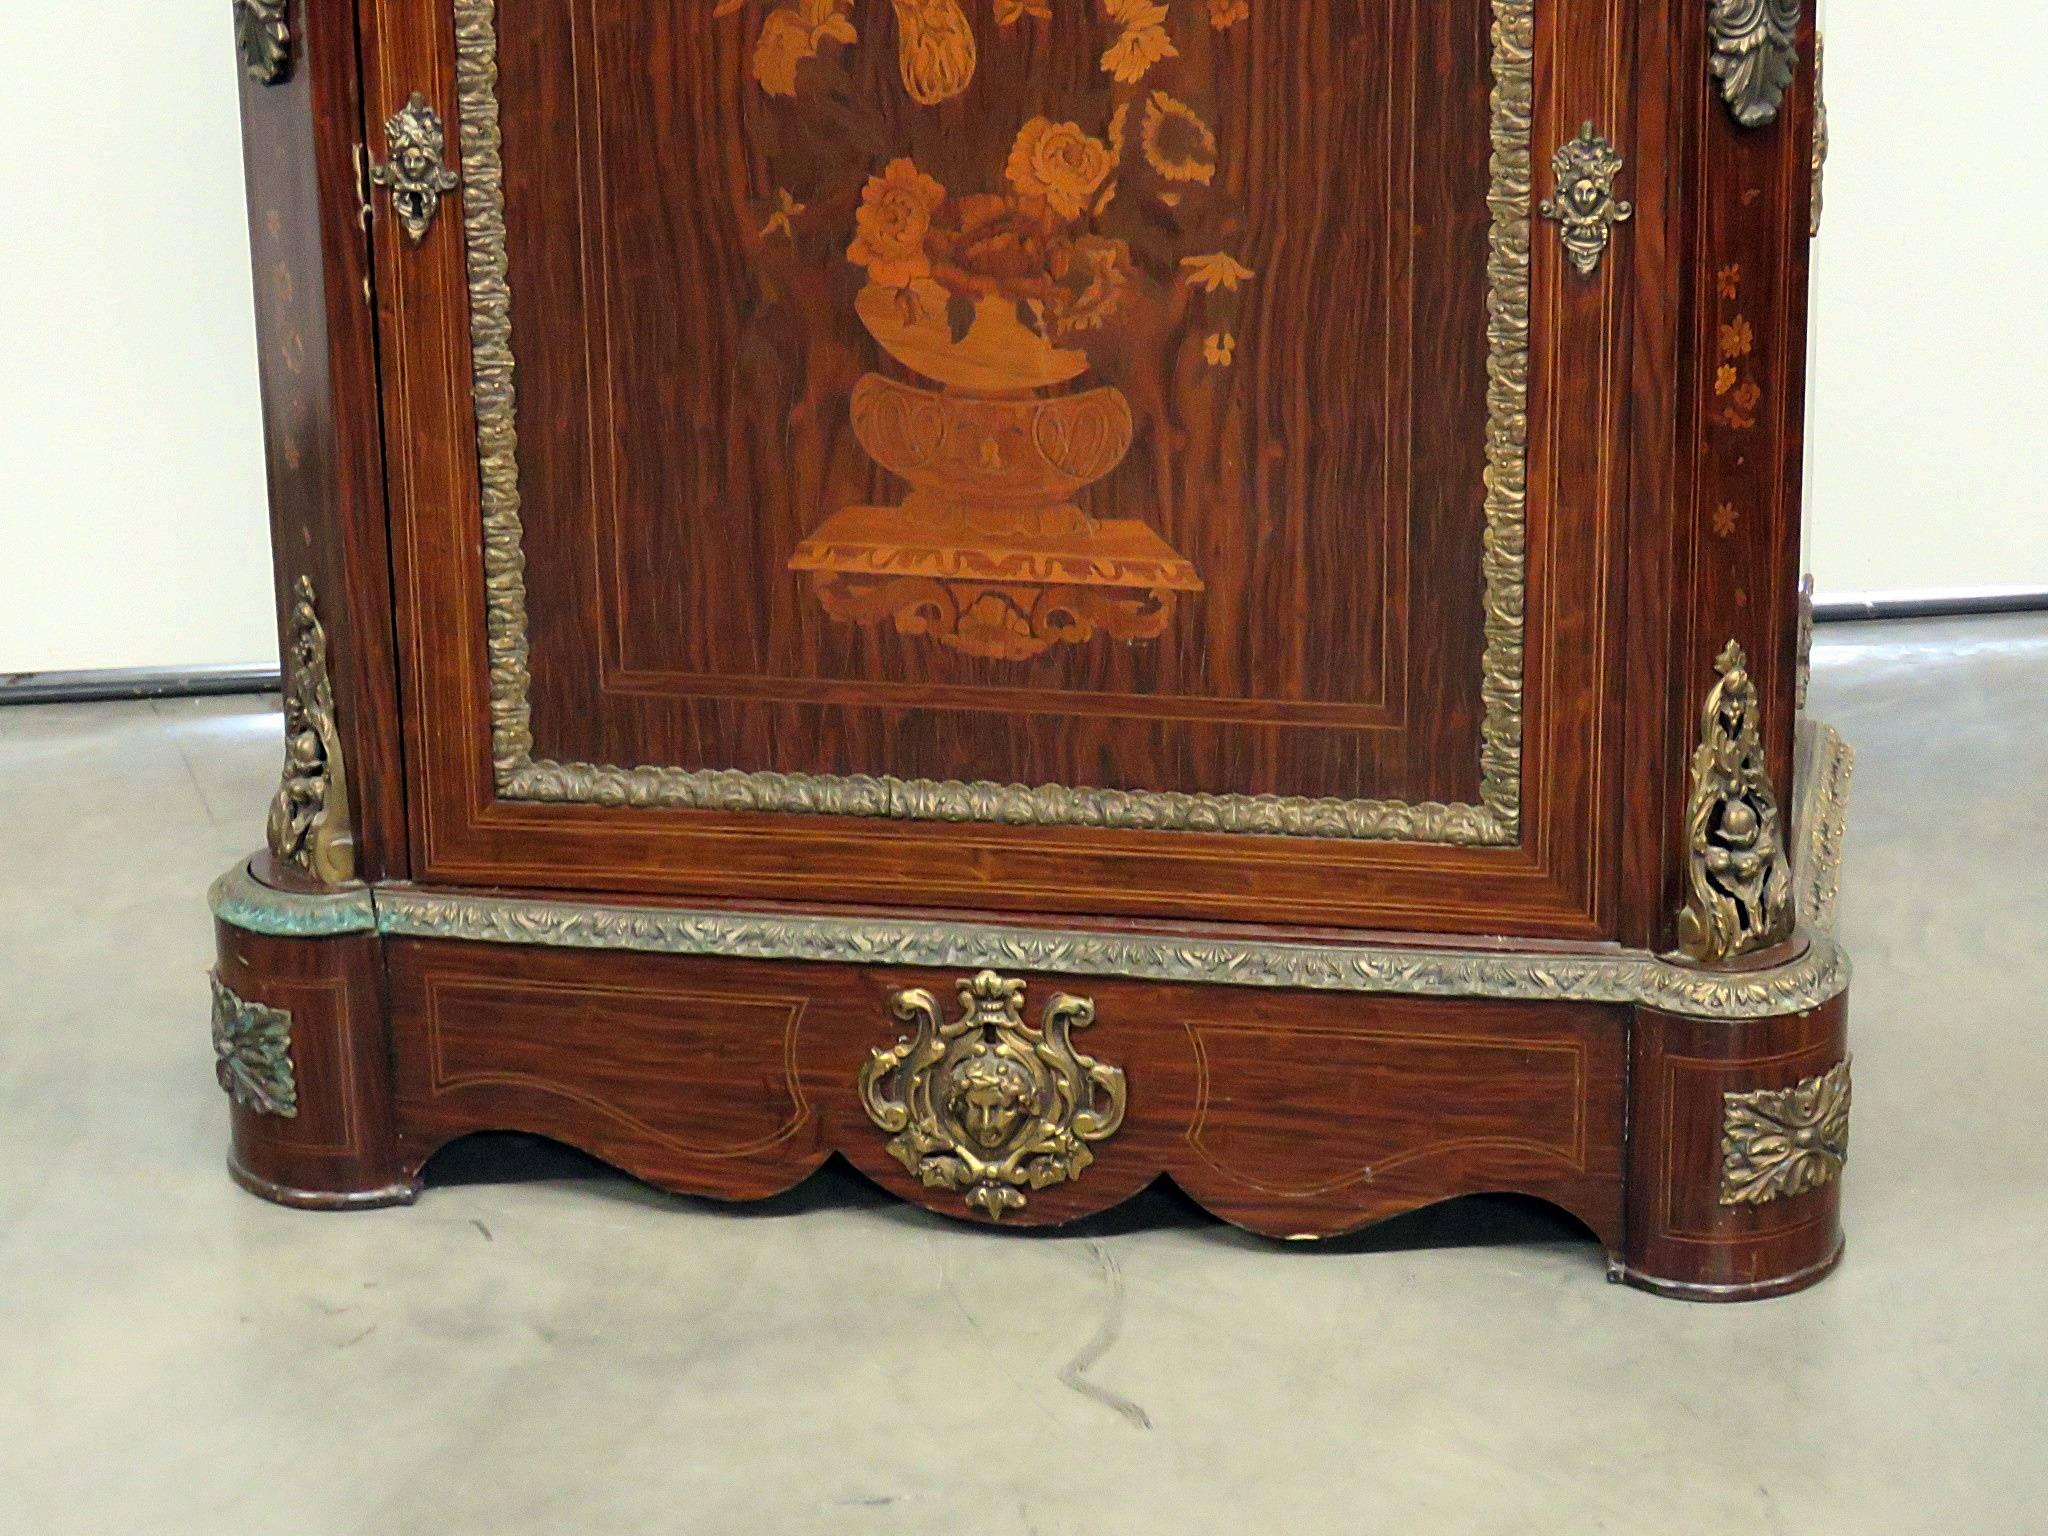 French Empire style marble top cabinet with one drawer over one door with one shelf. Detailed inlay with bronze accents.